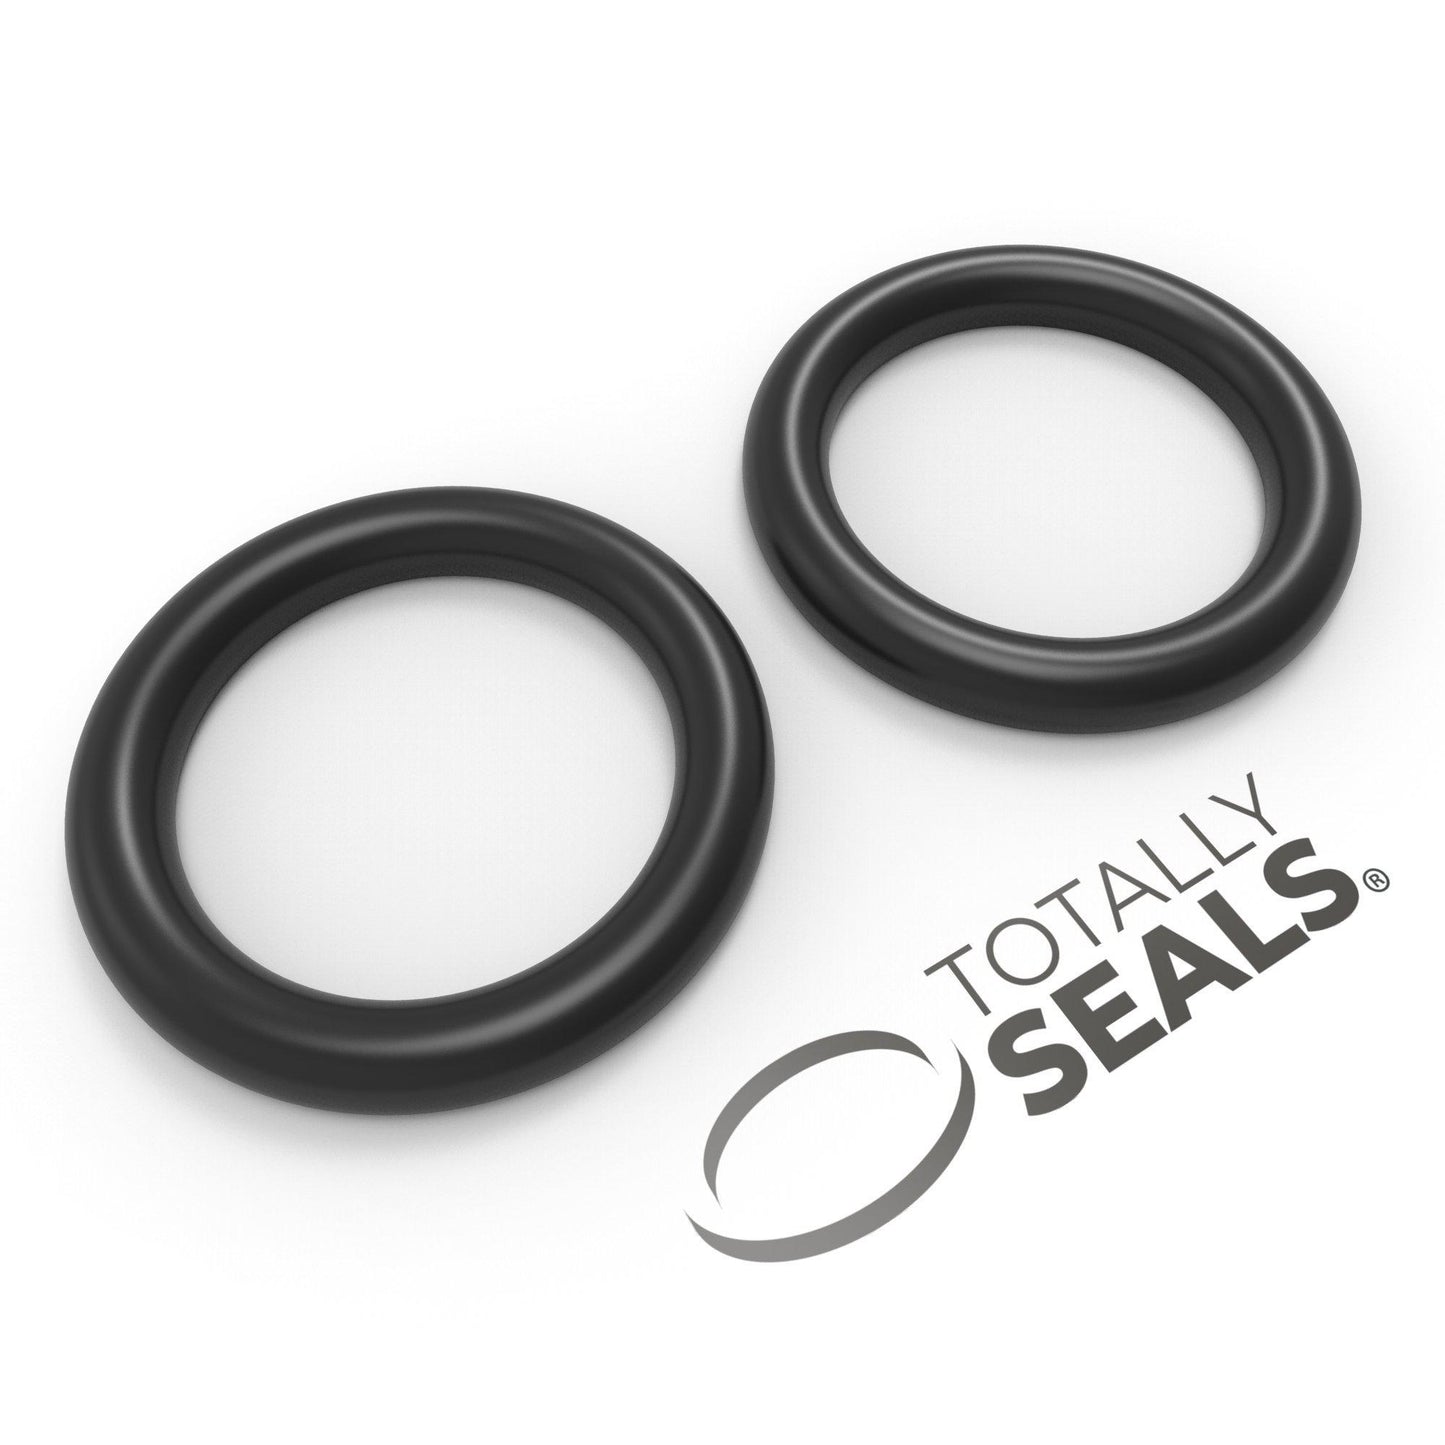 21mm x 1.5mm (24mm OD) Nitrile O-Rings - Totally Seals®